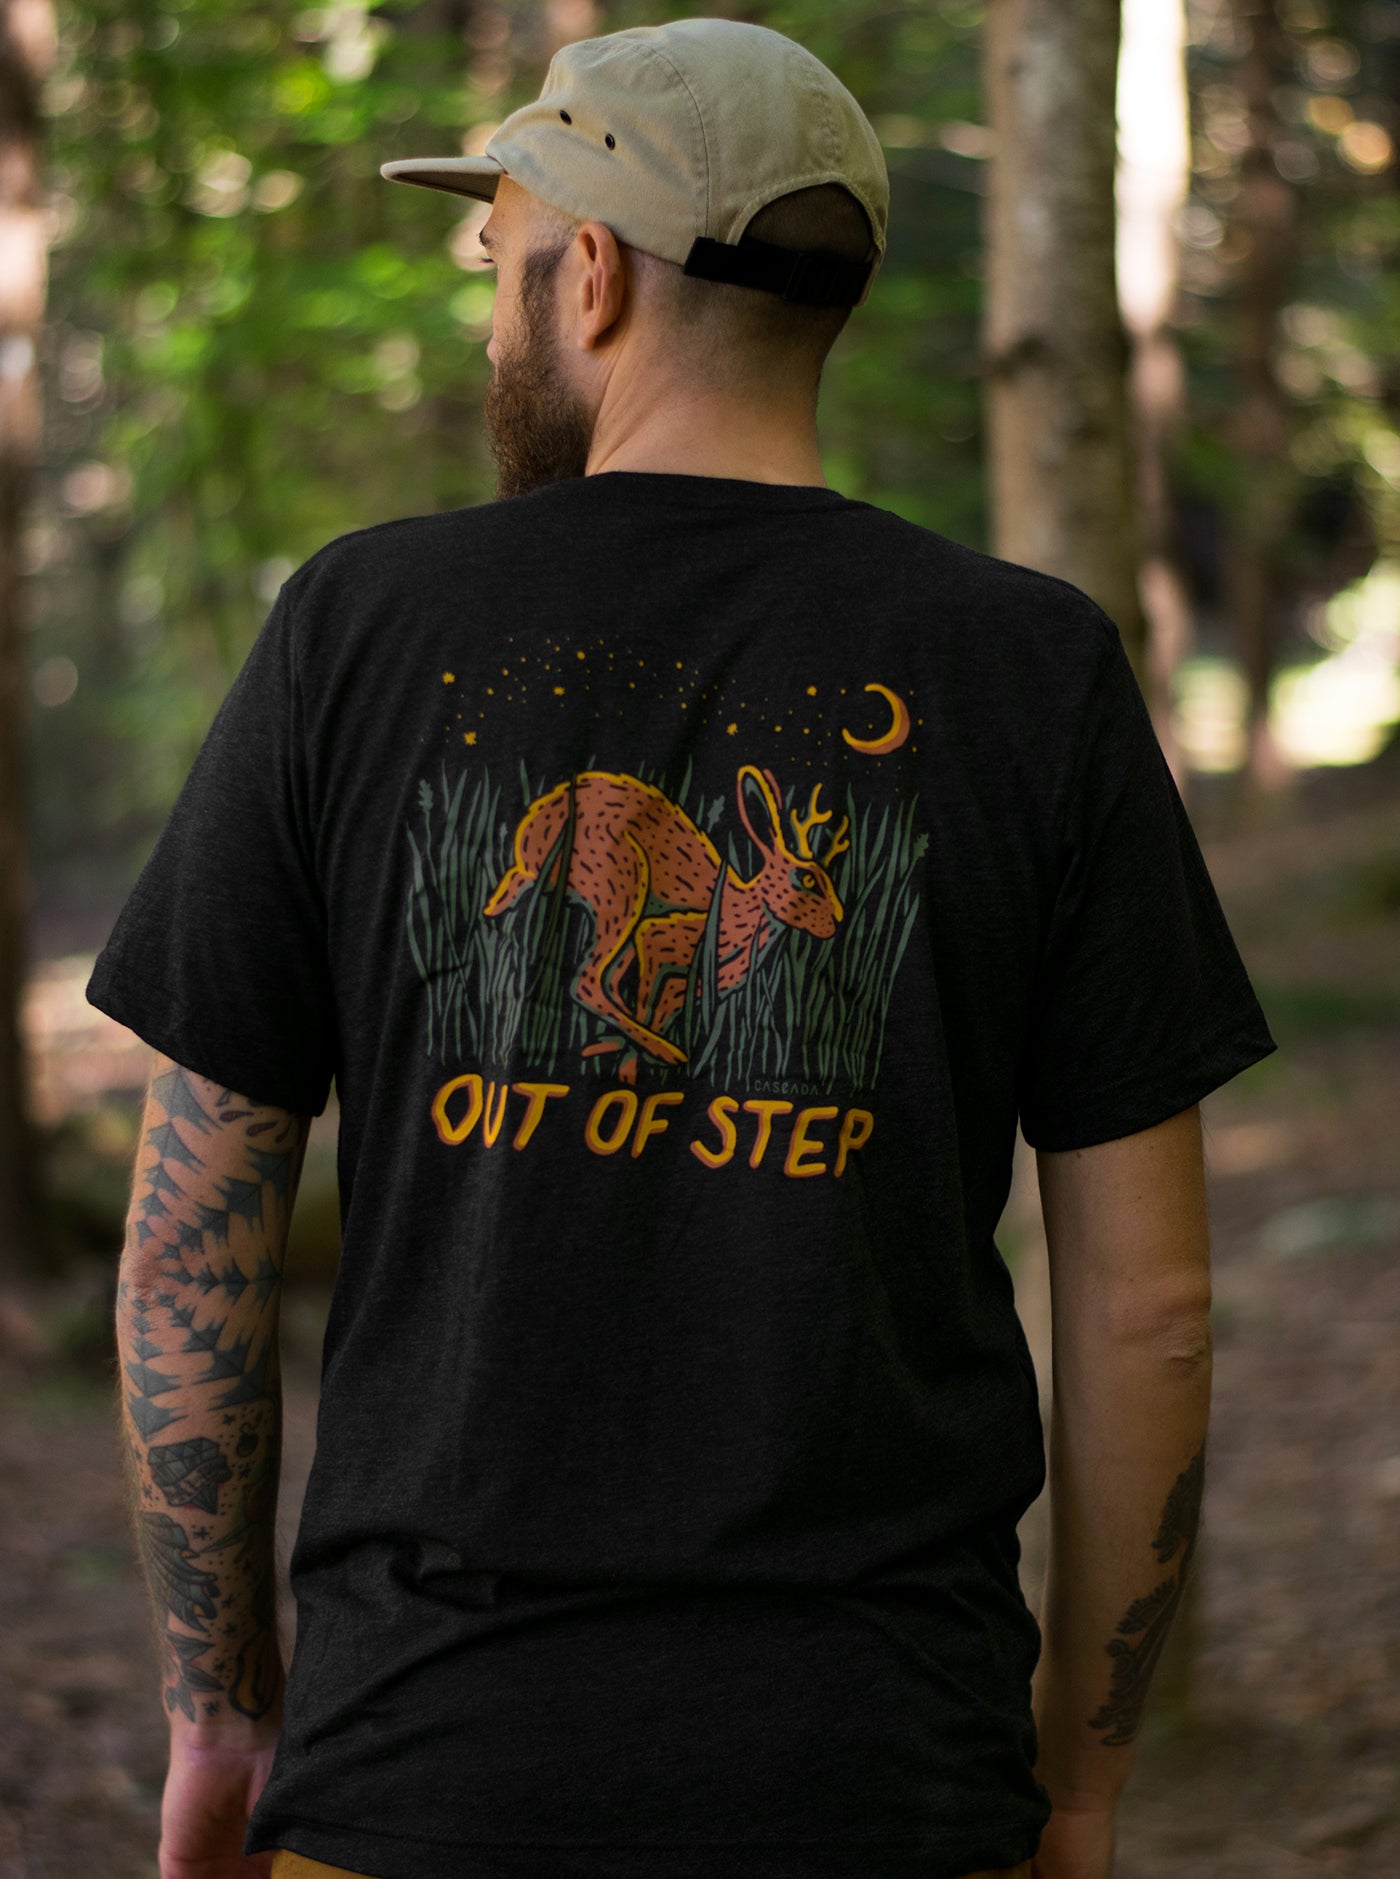 Escapade Unisex T-Shirt - Out Of Step